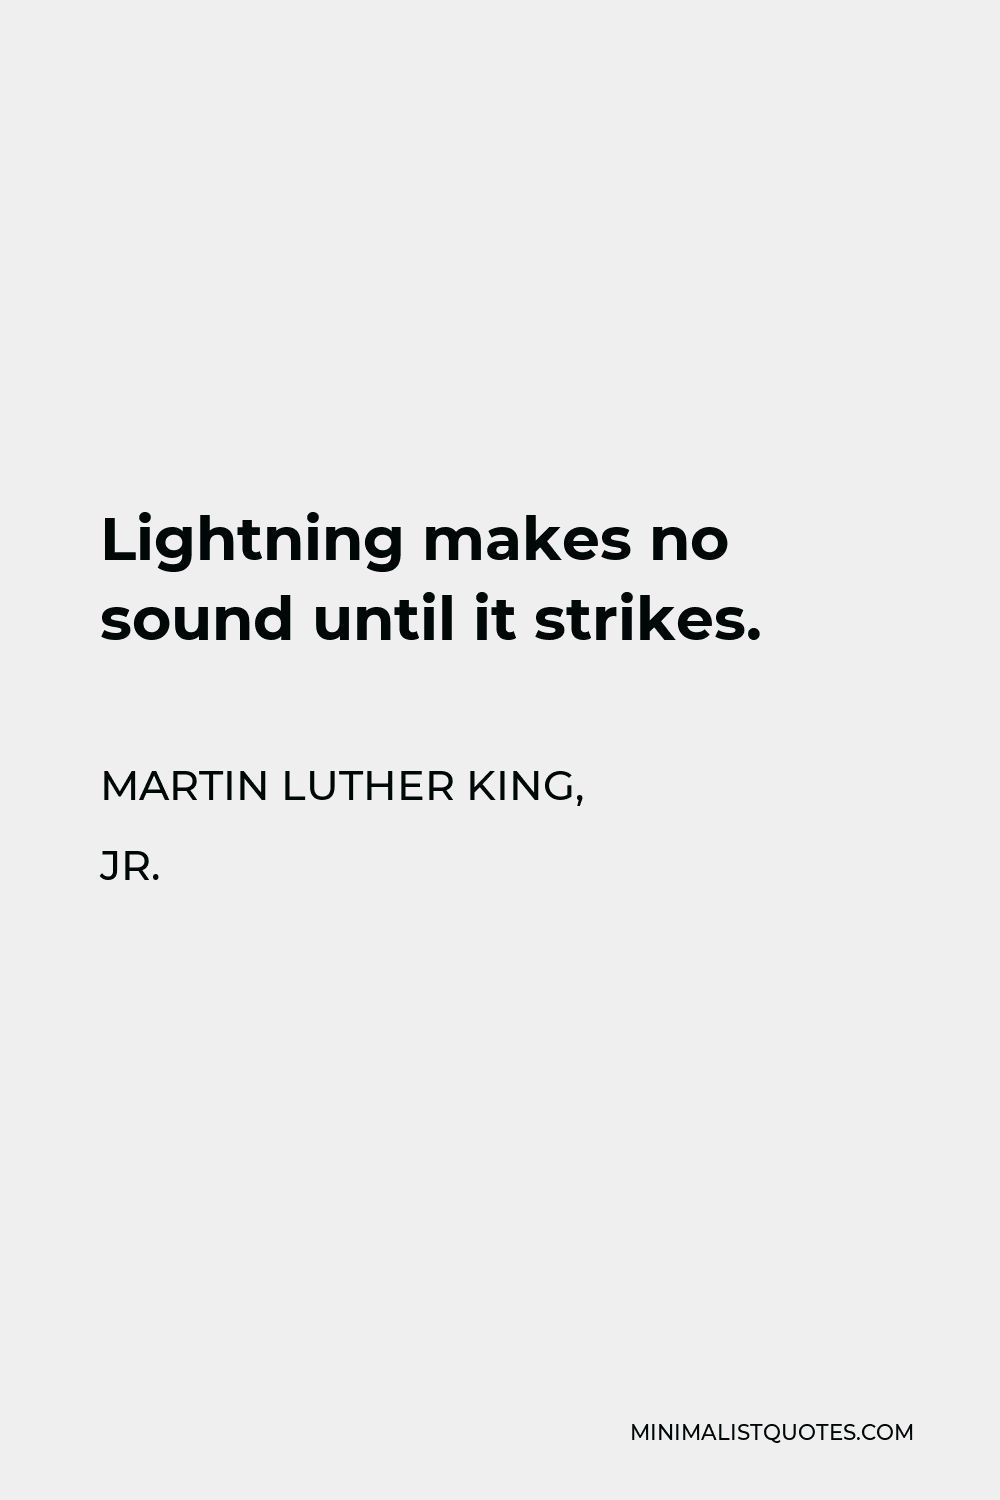 Martin Luther King, Jr. Quote - Lightning makes no sound until it strikes.